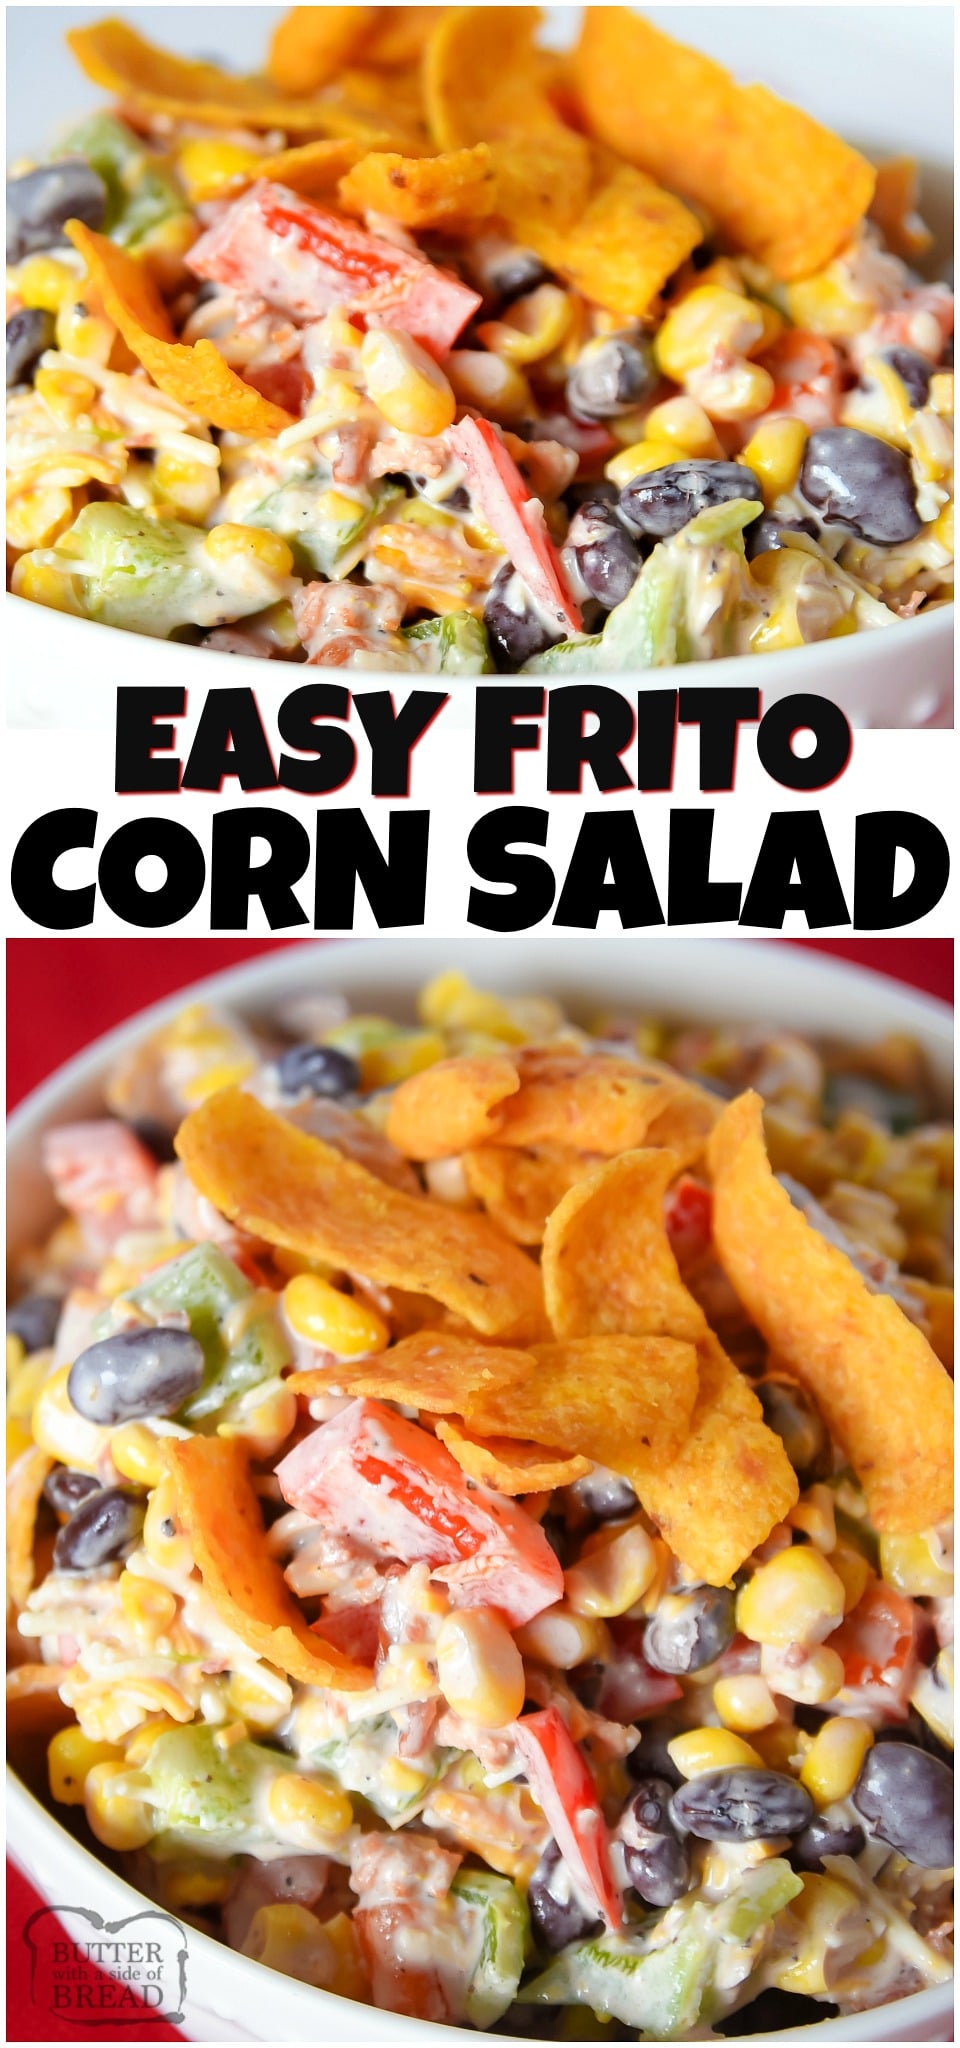 Frito Corn Salad is a simple & flavorful summer salad perfect for any potluck or BBQ. It is packed full of fresh vegetables, cheese, bacon & crunchy Frito chips that are hard to resist!